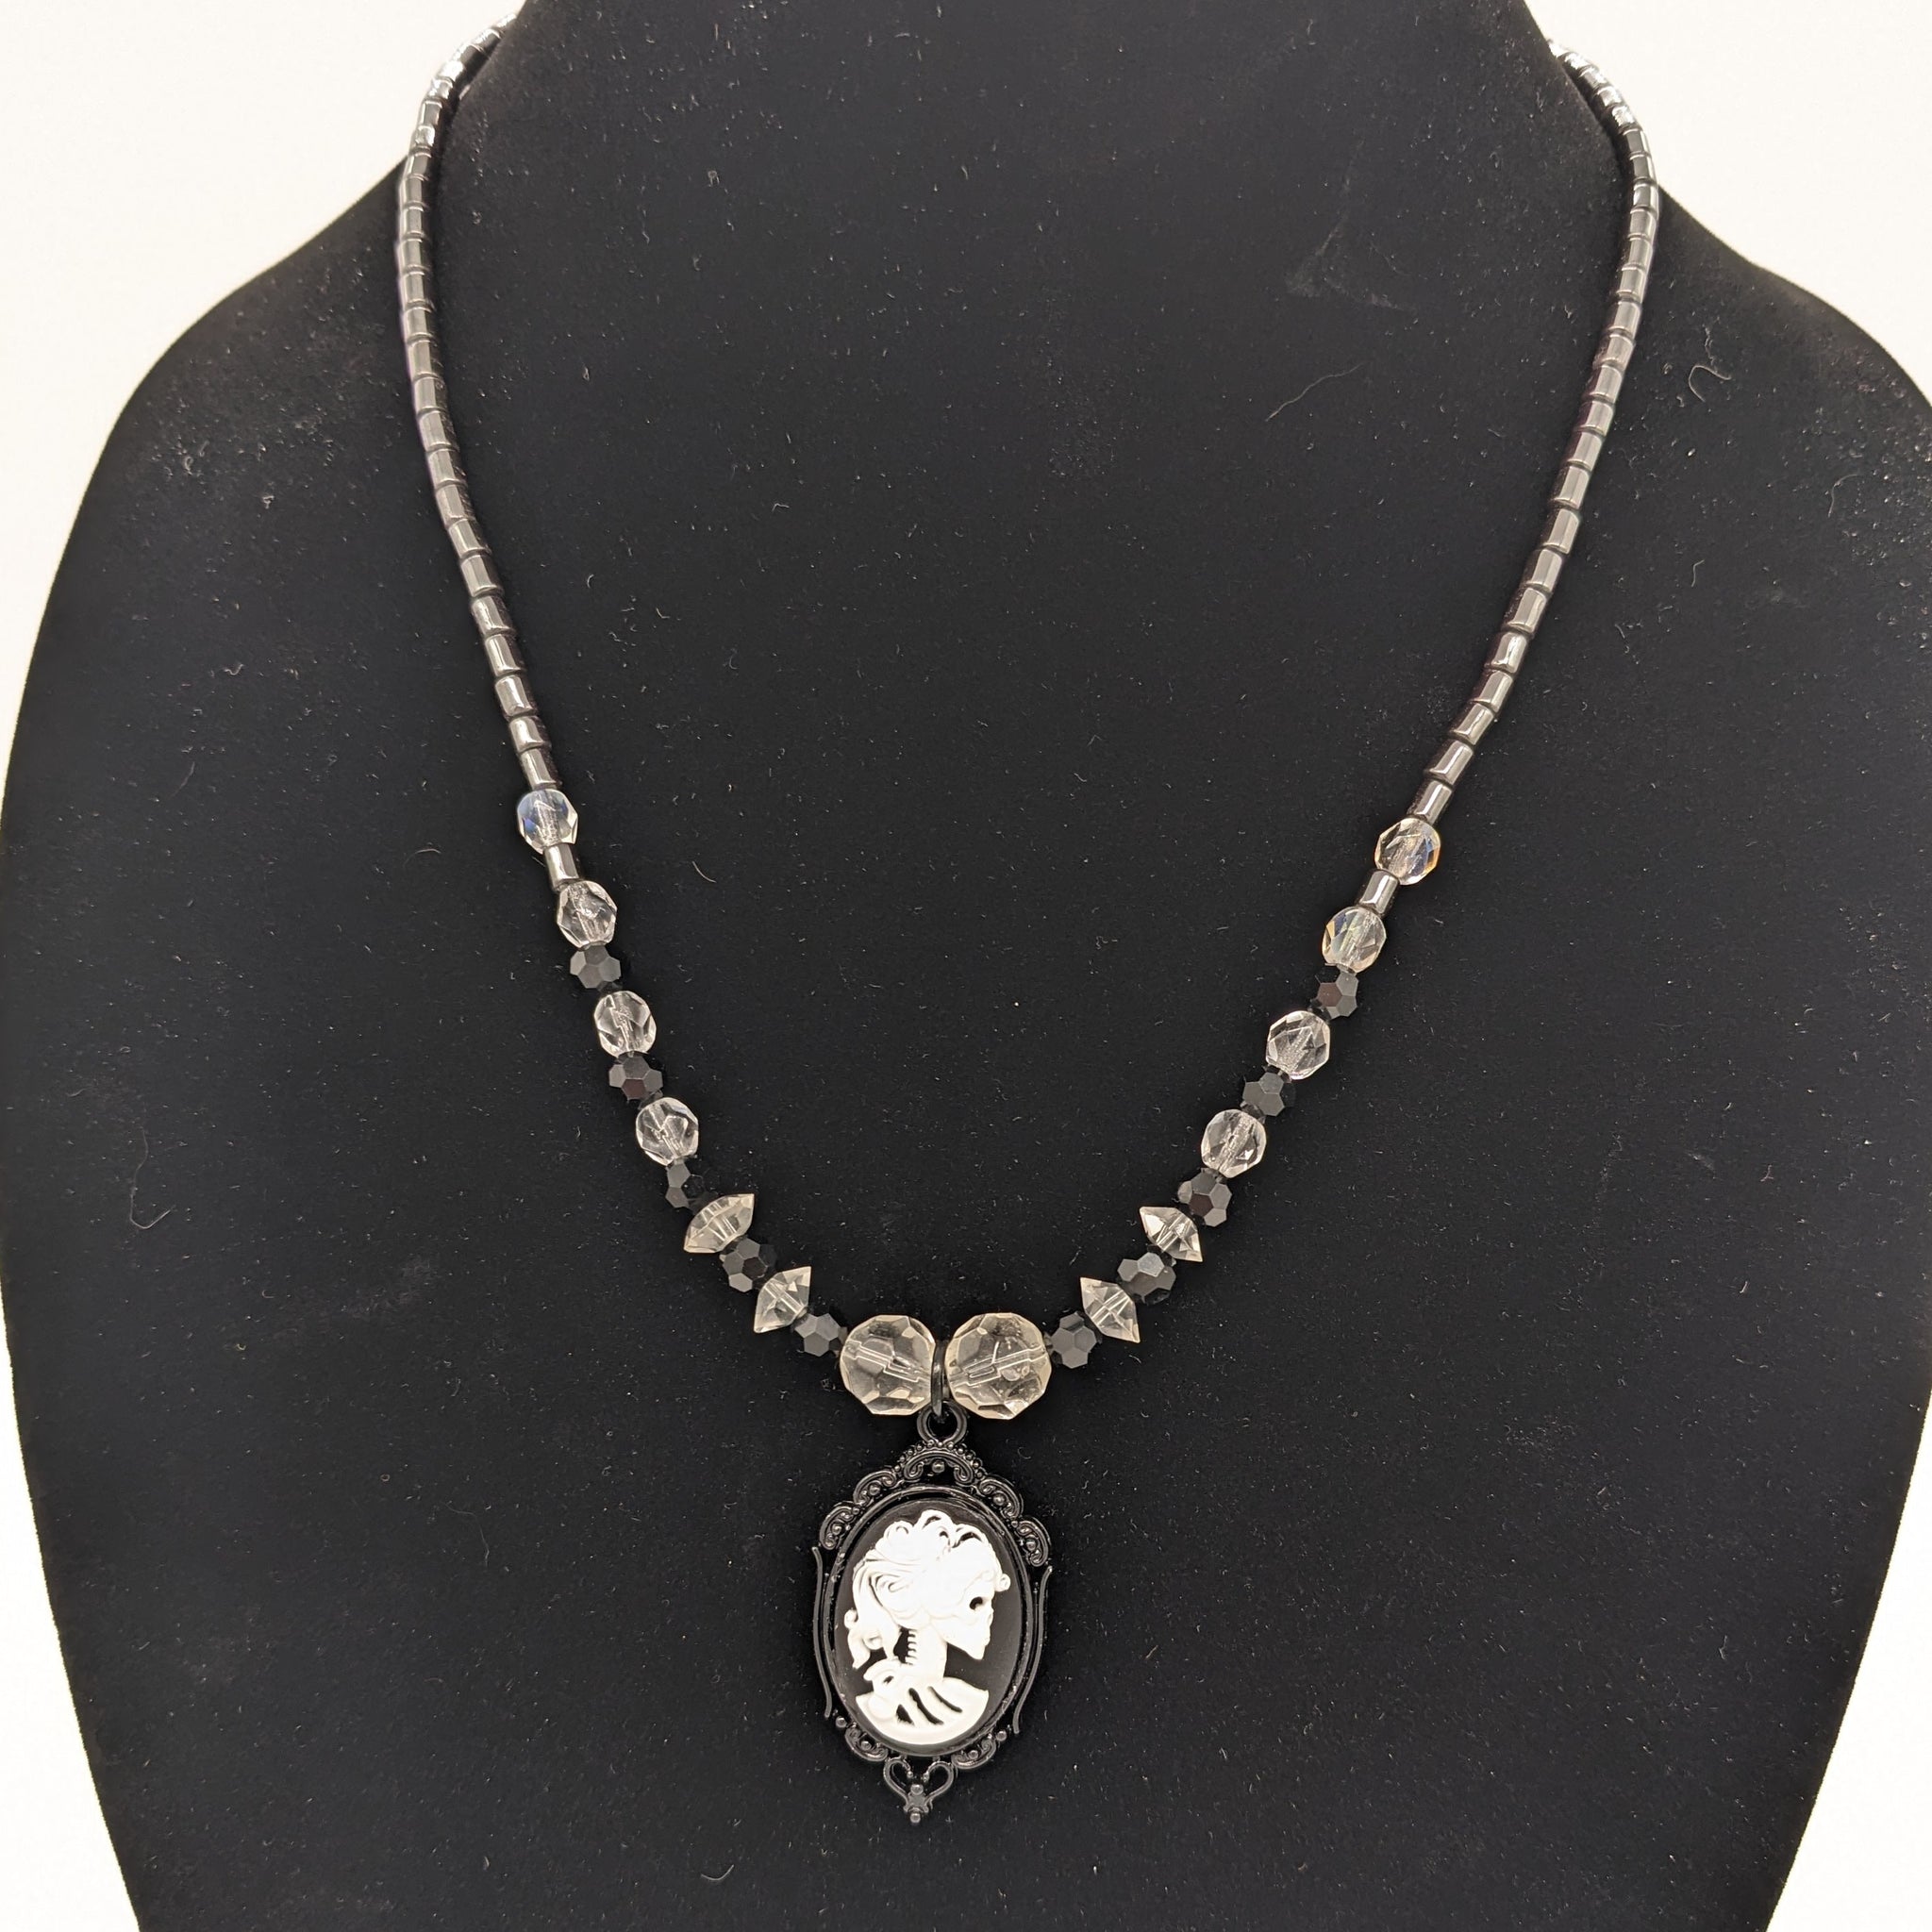 Lady Skeleton Necklace in White and Hematite